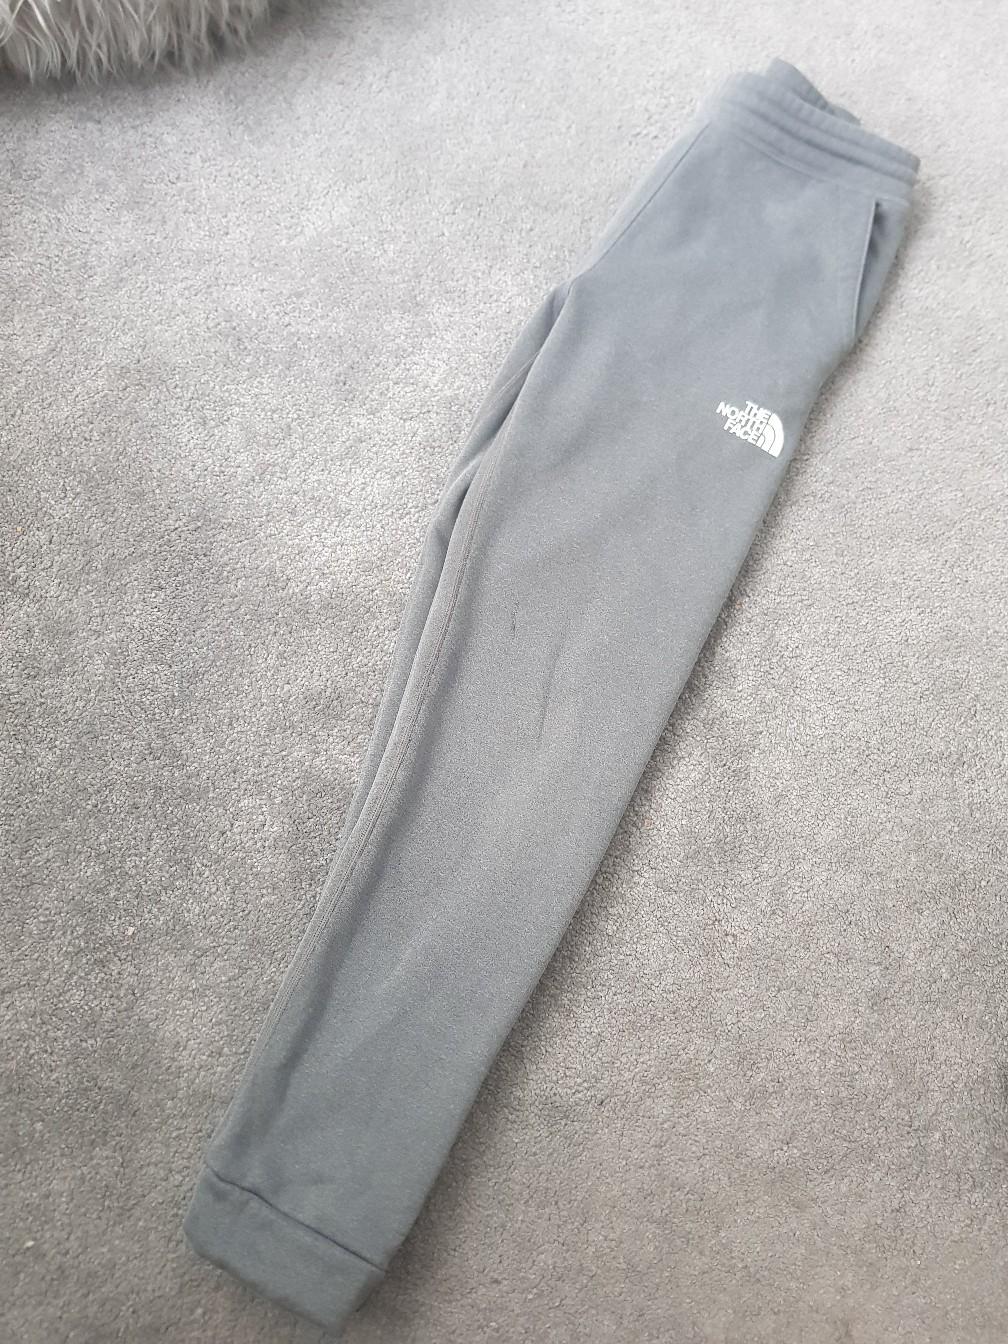 tracksuit bottoms north face